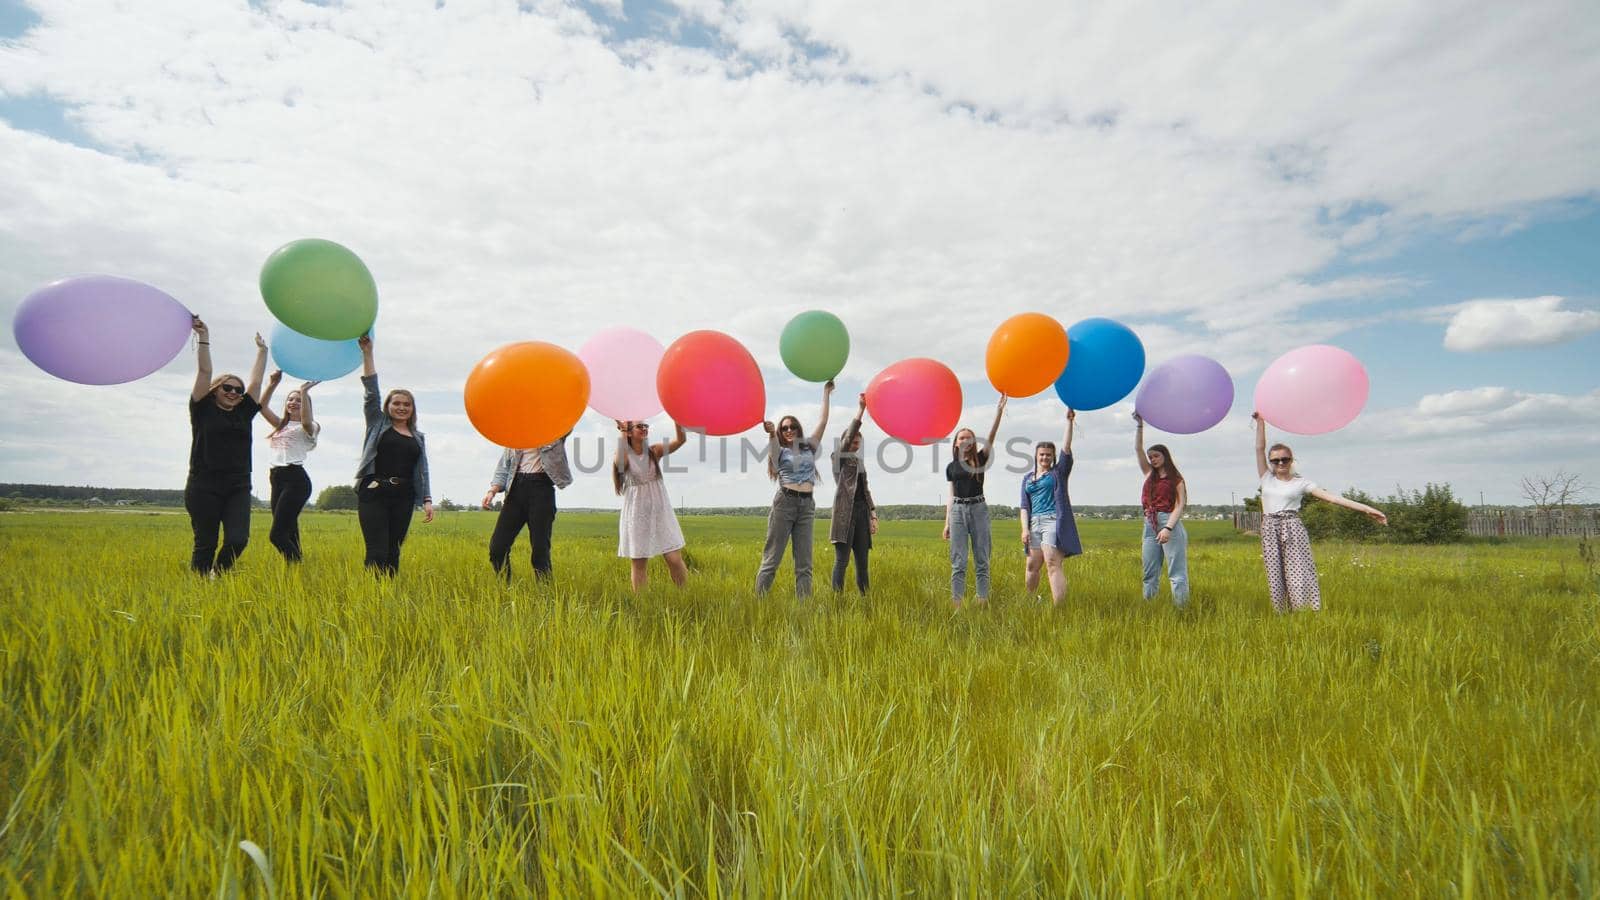 Cheerful girls are standing on the field with large balloons and colorful balloons